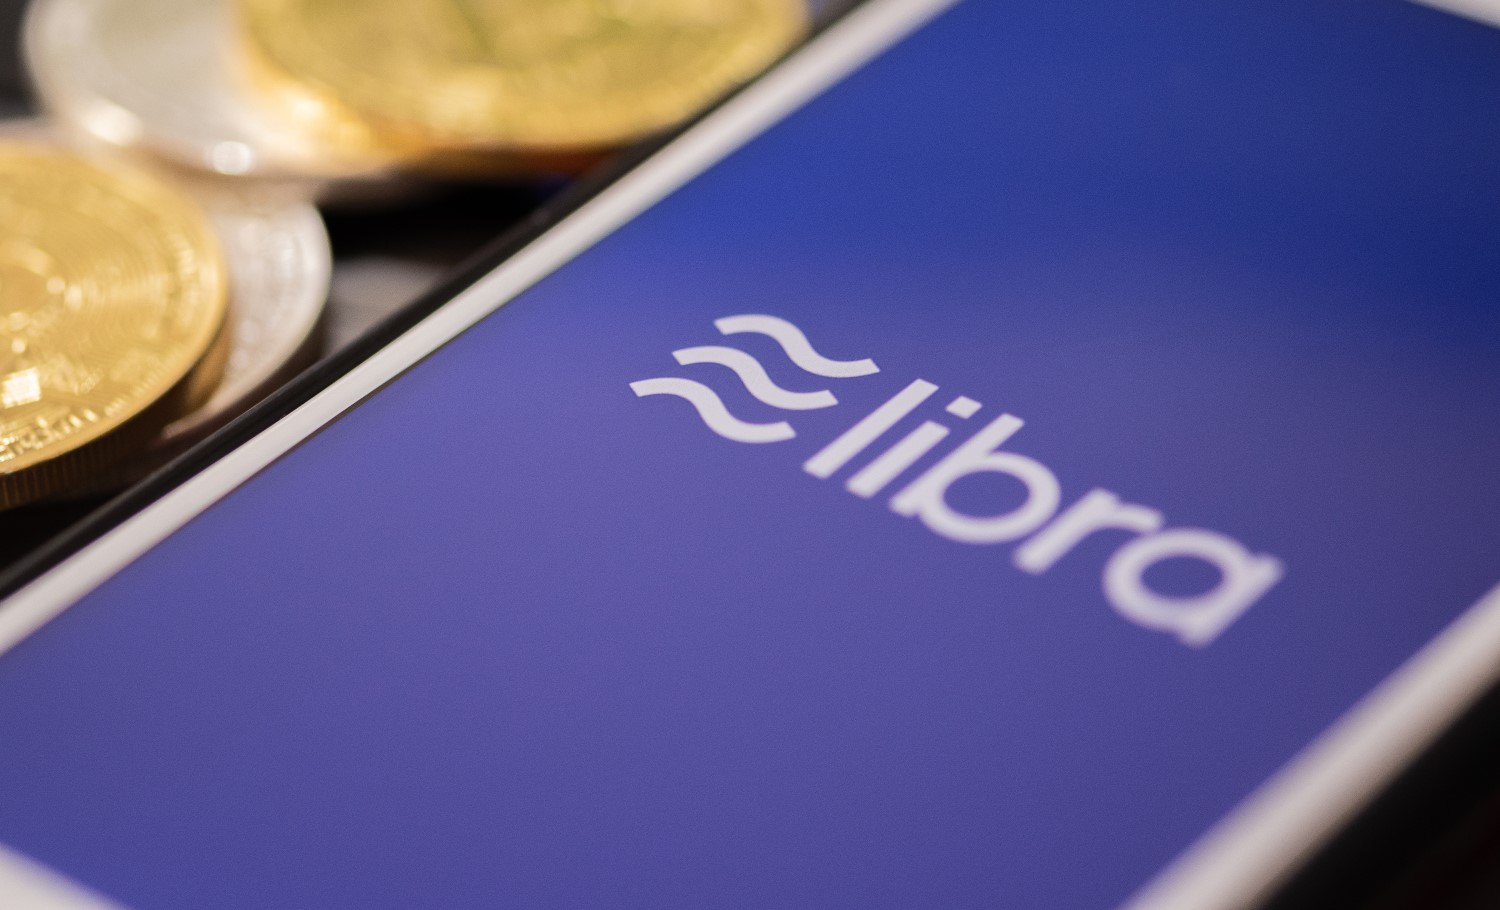 Libra-hasn’t-abandoned-multi-currency-stablecoin:-policy-director